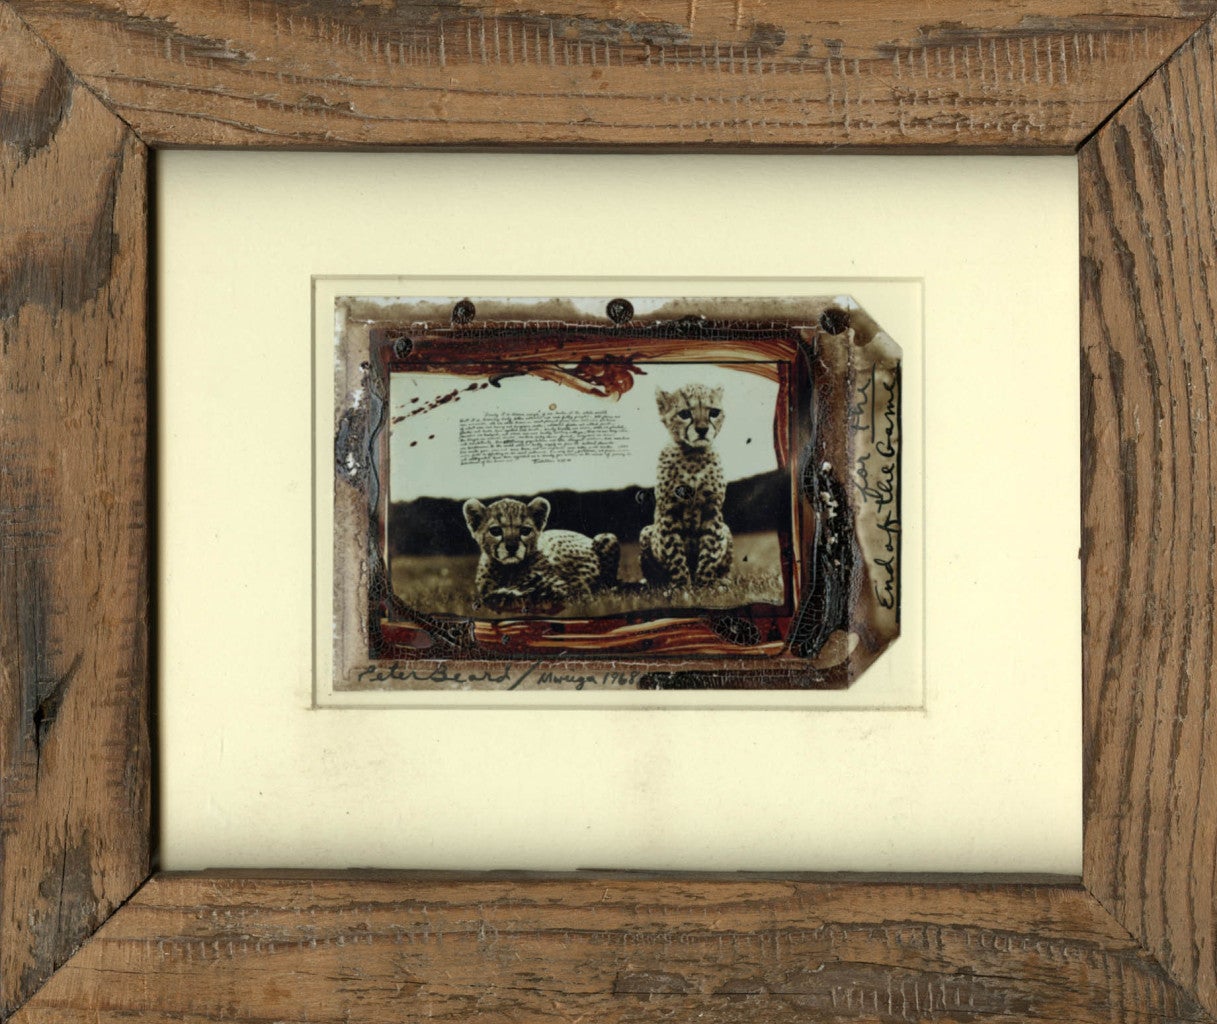 Signed, titled, and dated in ink on recto. Framed in original driftwood cove frame.